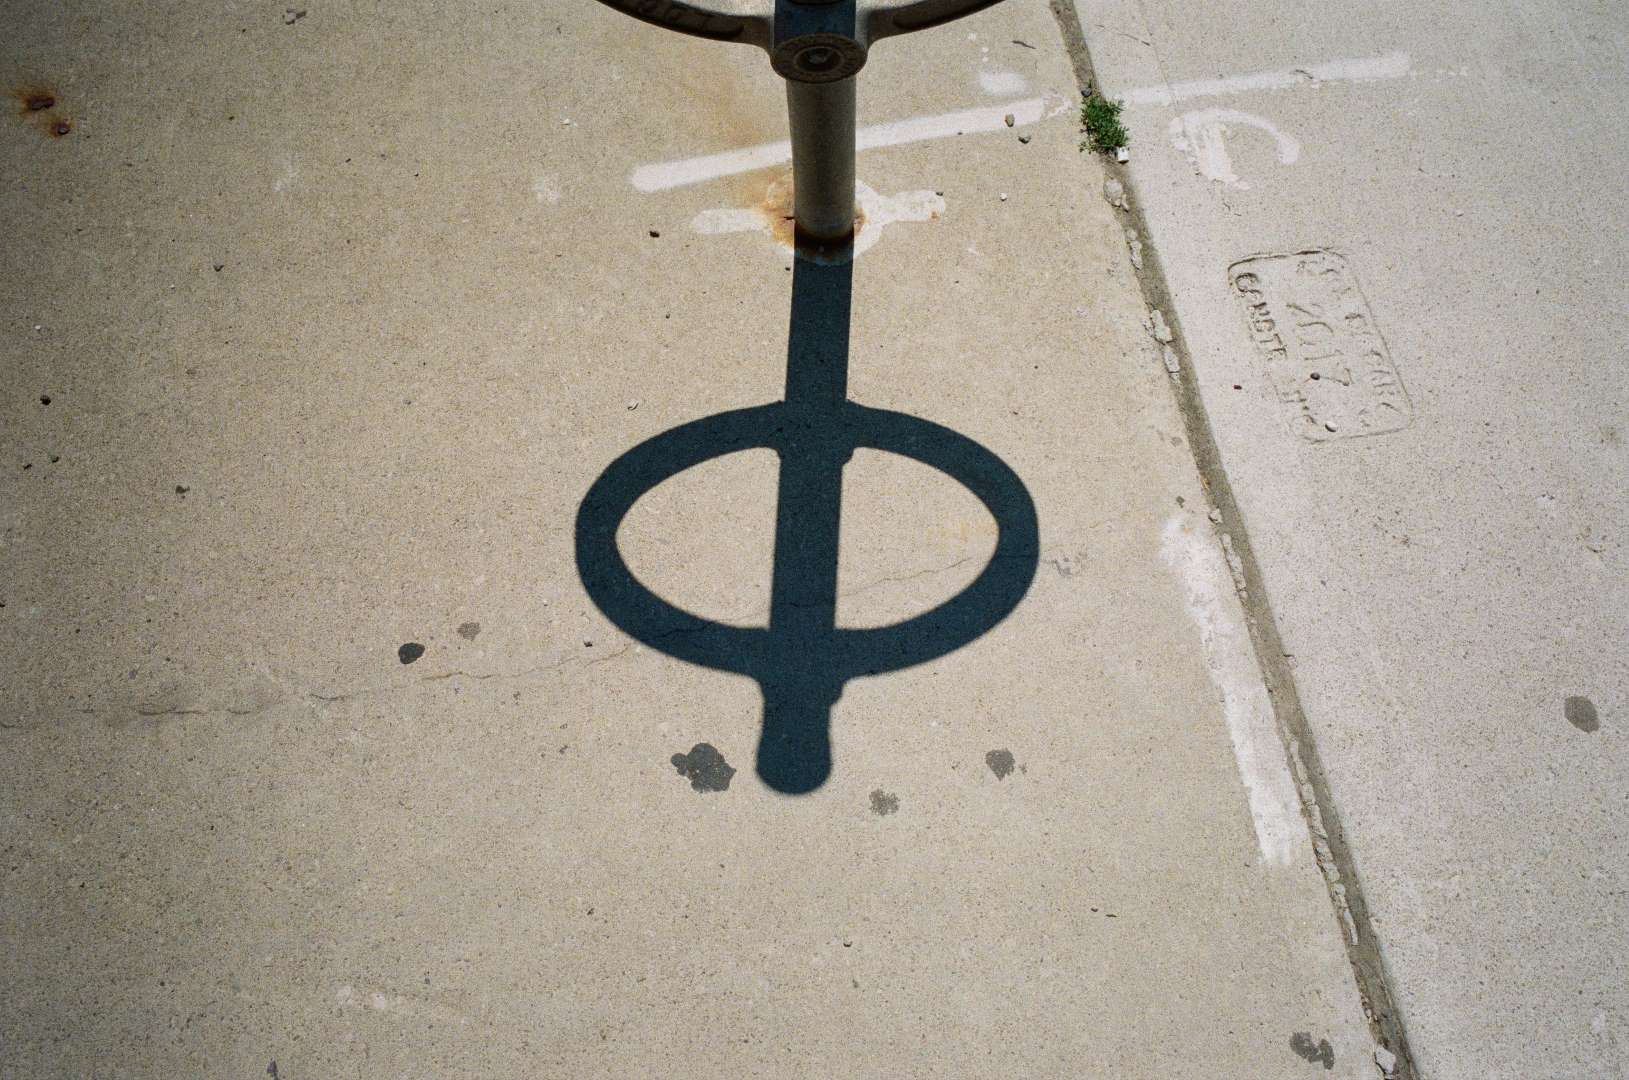 A colour photograph of the shadow of a bike ring and post, the shadow marking time against stains on the sidewalk.